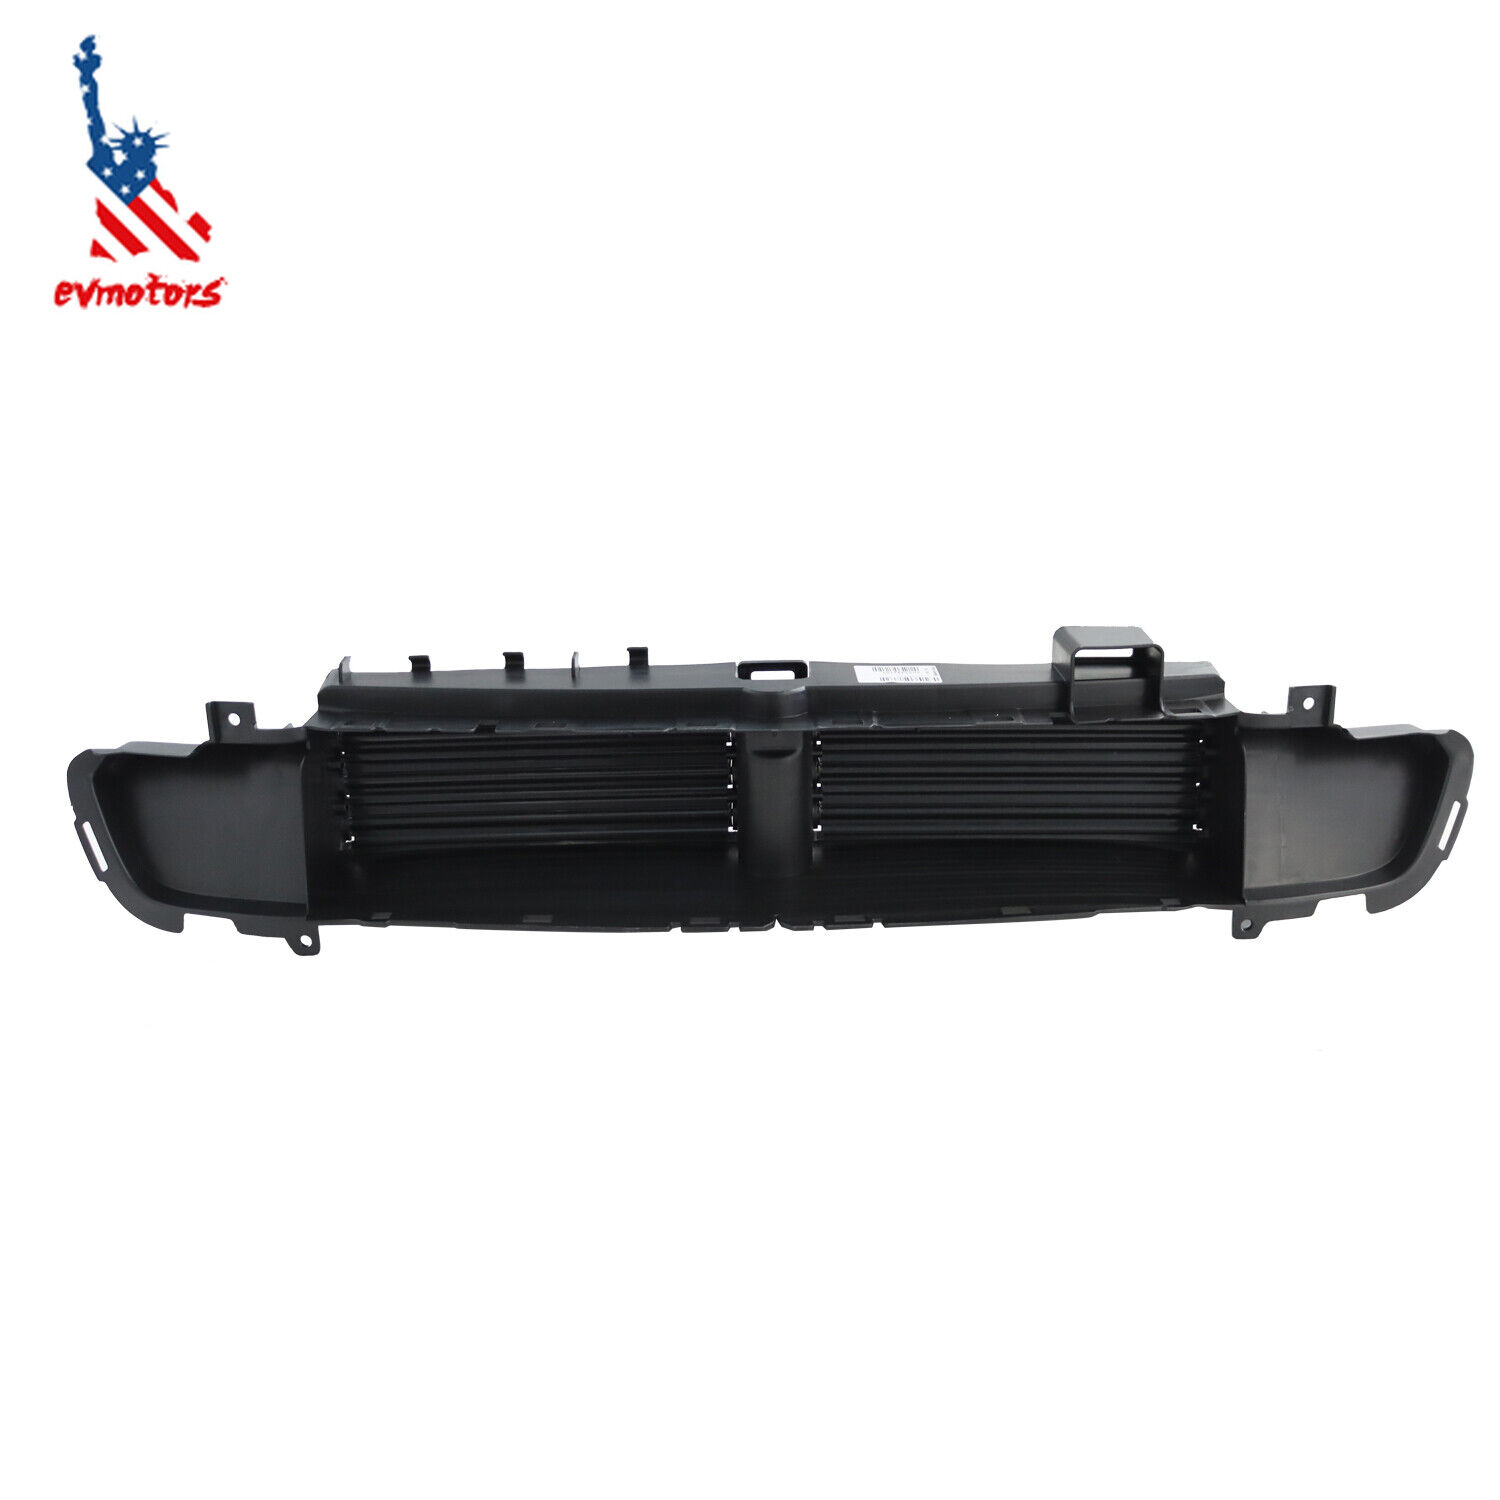 Grille Shutter Assembly For 2014-2018 Jeep Cherokee Includes Motor / Actuator